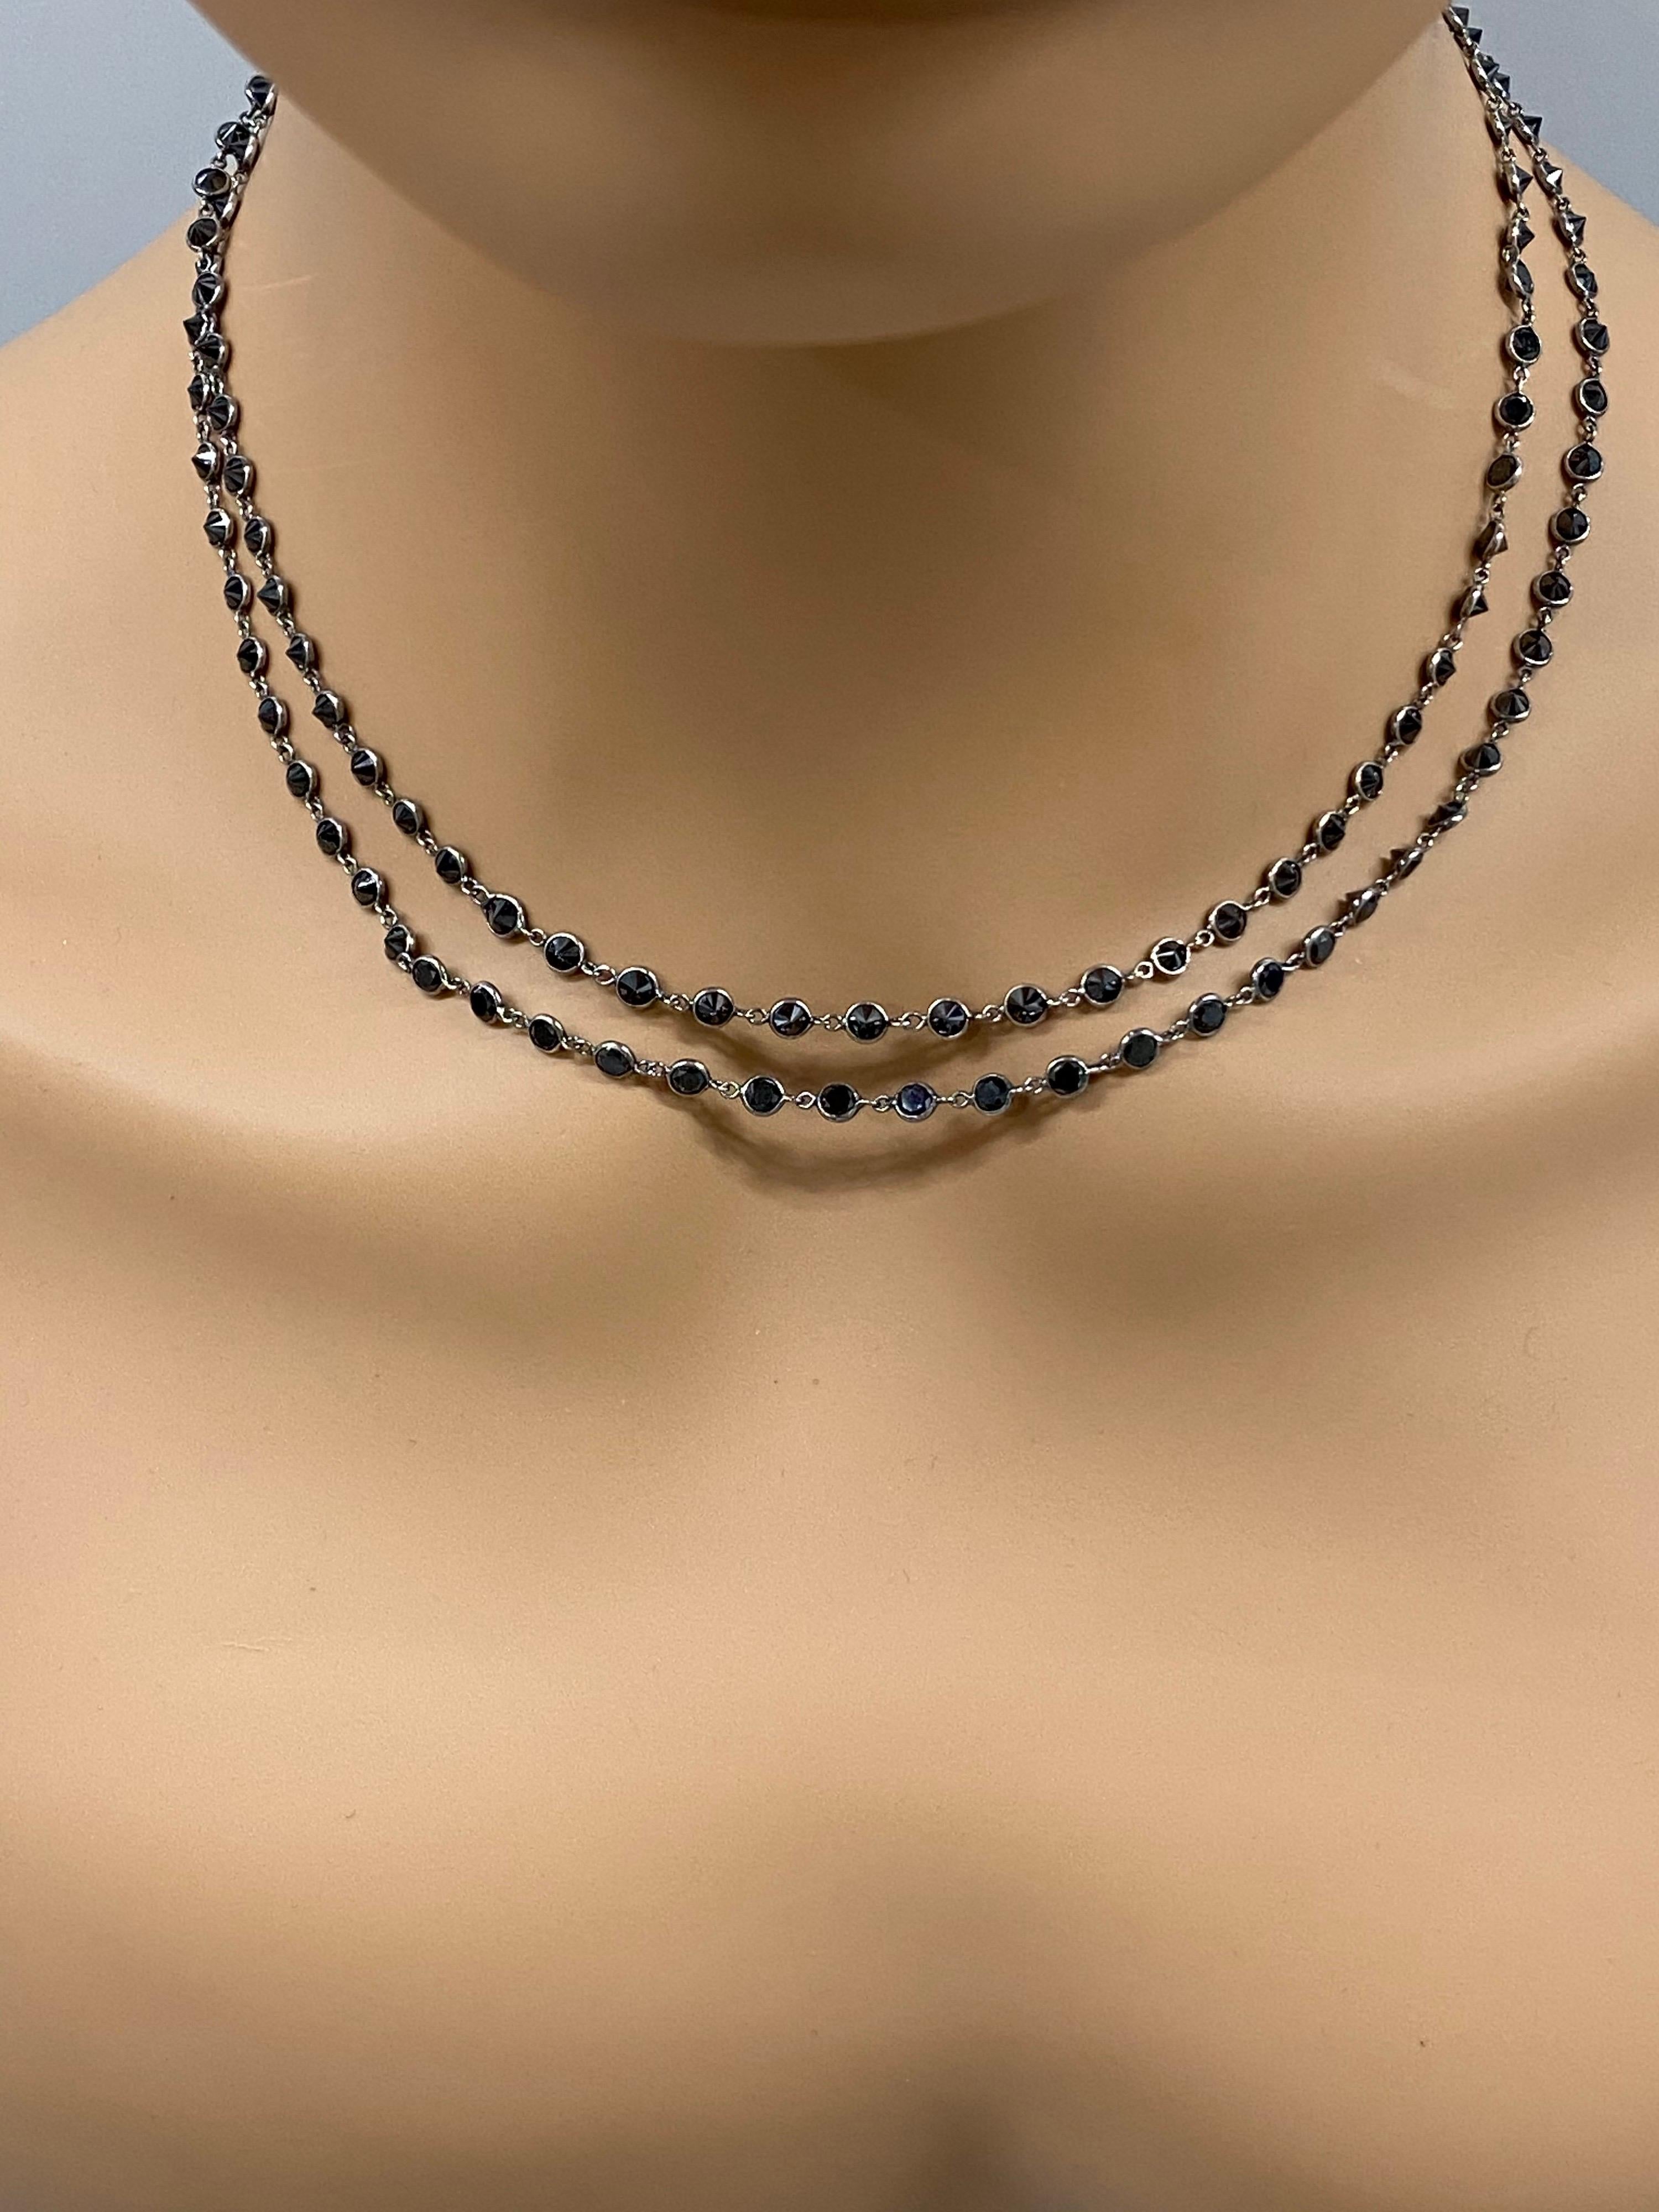 Easy, glistening black diamonds set in 18k blackened gold. Wear it long at 34 inches or double it for a layered look. So versatile! 
Approximately 16 CTW.
See photos of some of our pendants hanging from this glam chain. (Pendants sold separately)